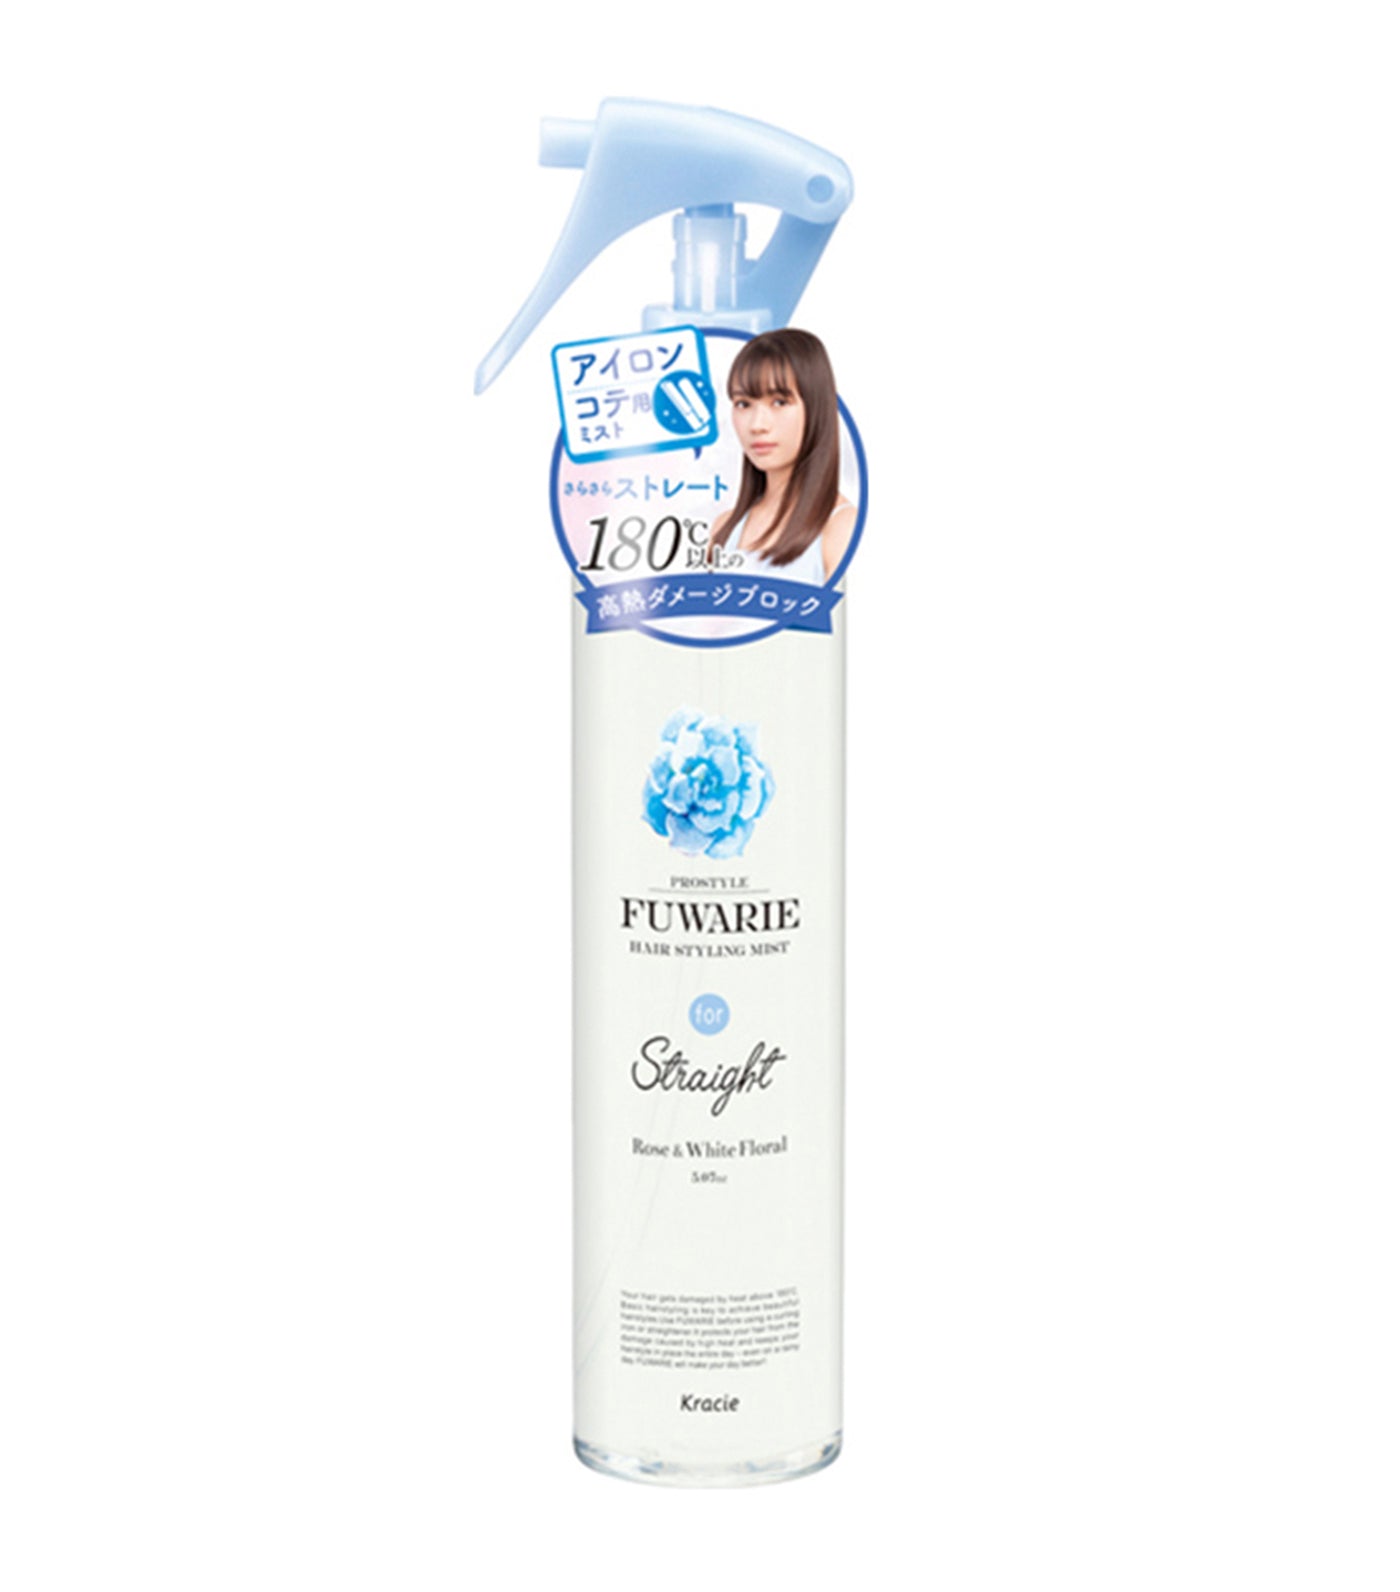 Prostyle Fuwarie Hair Styling Mist for Straight